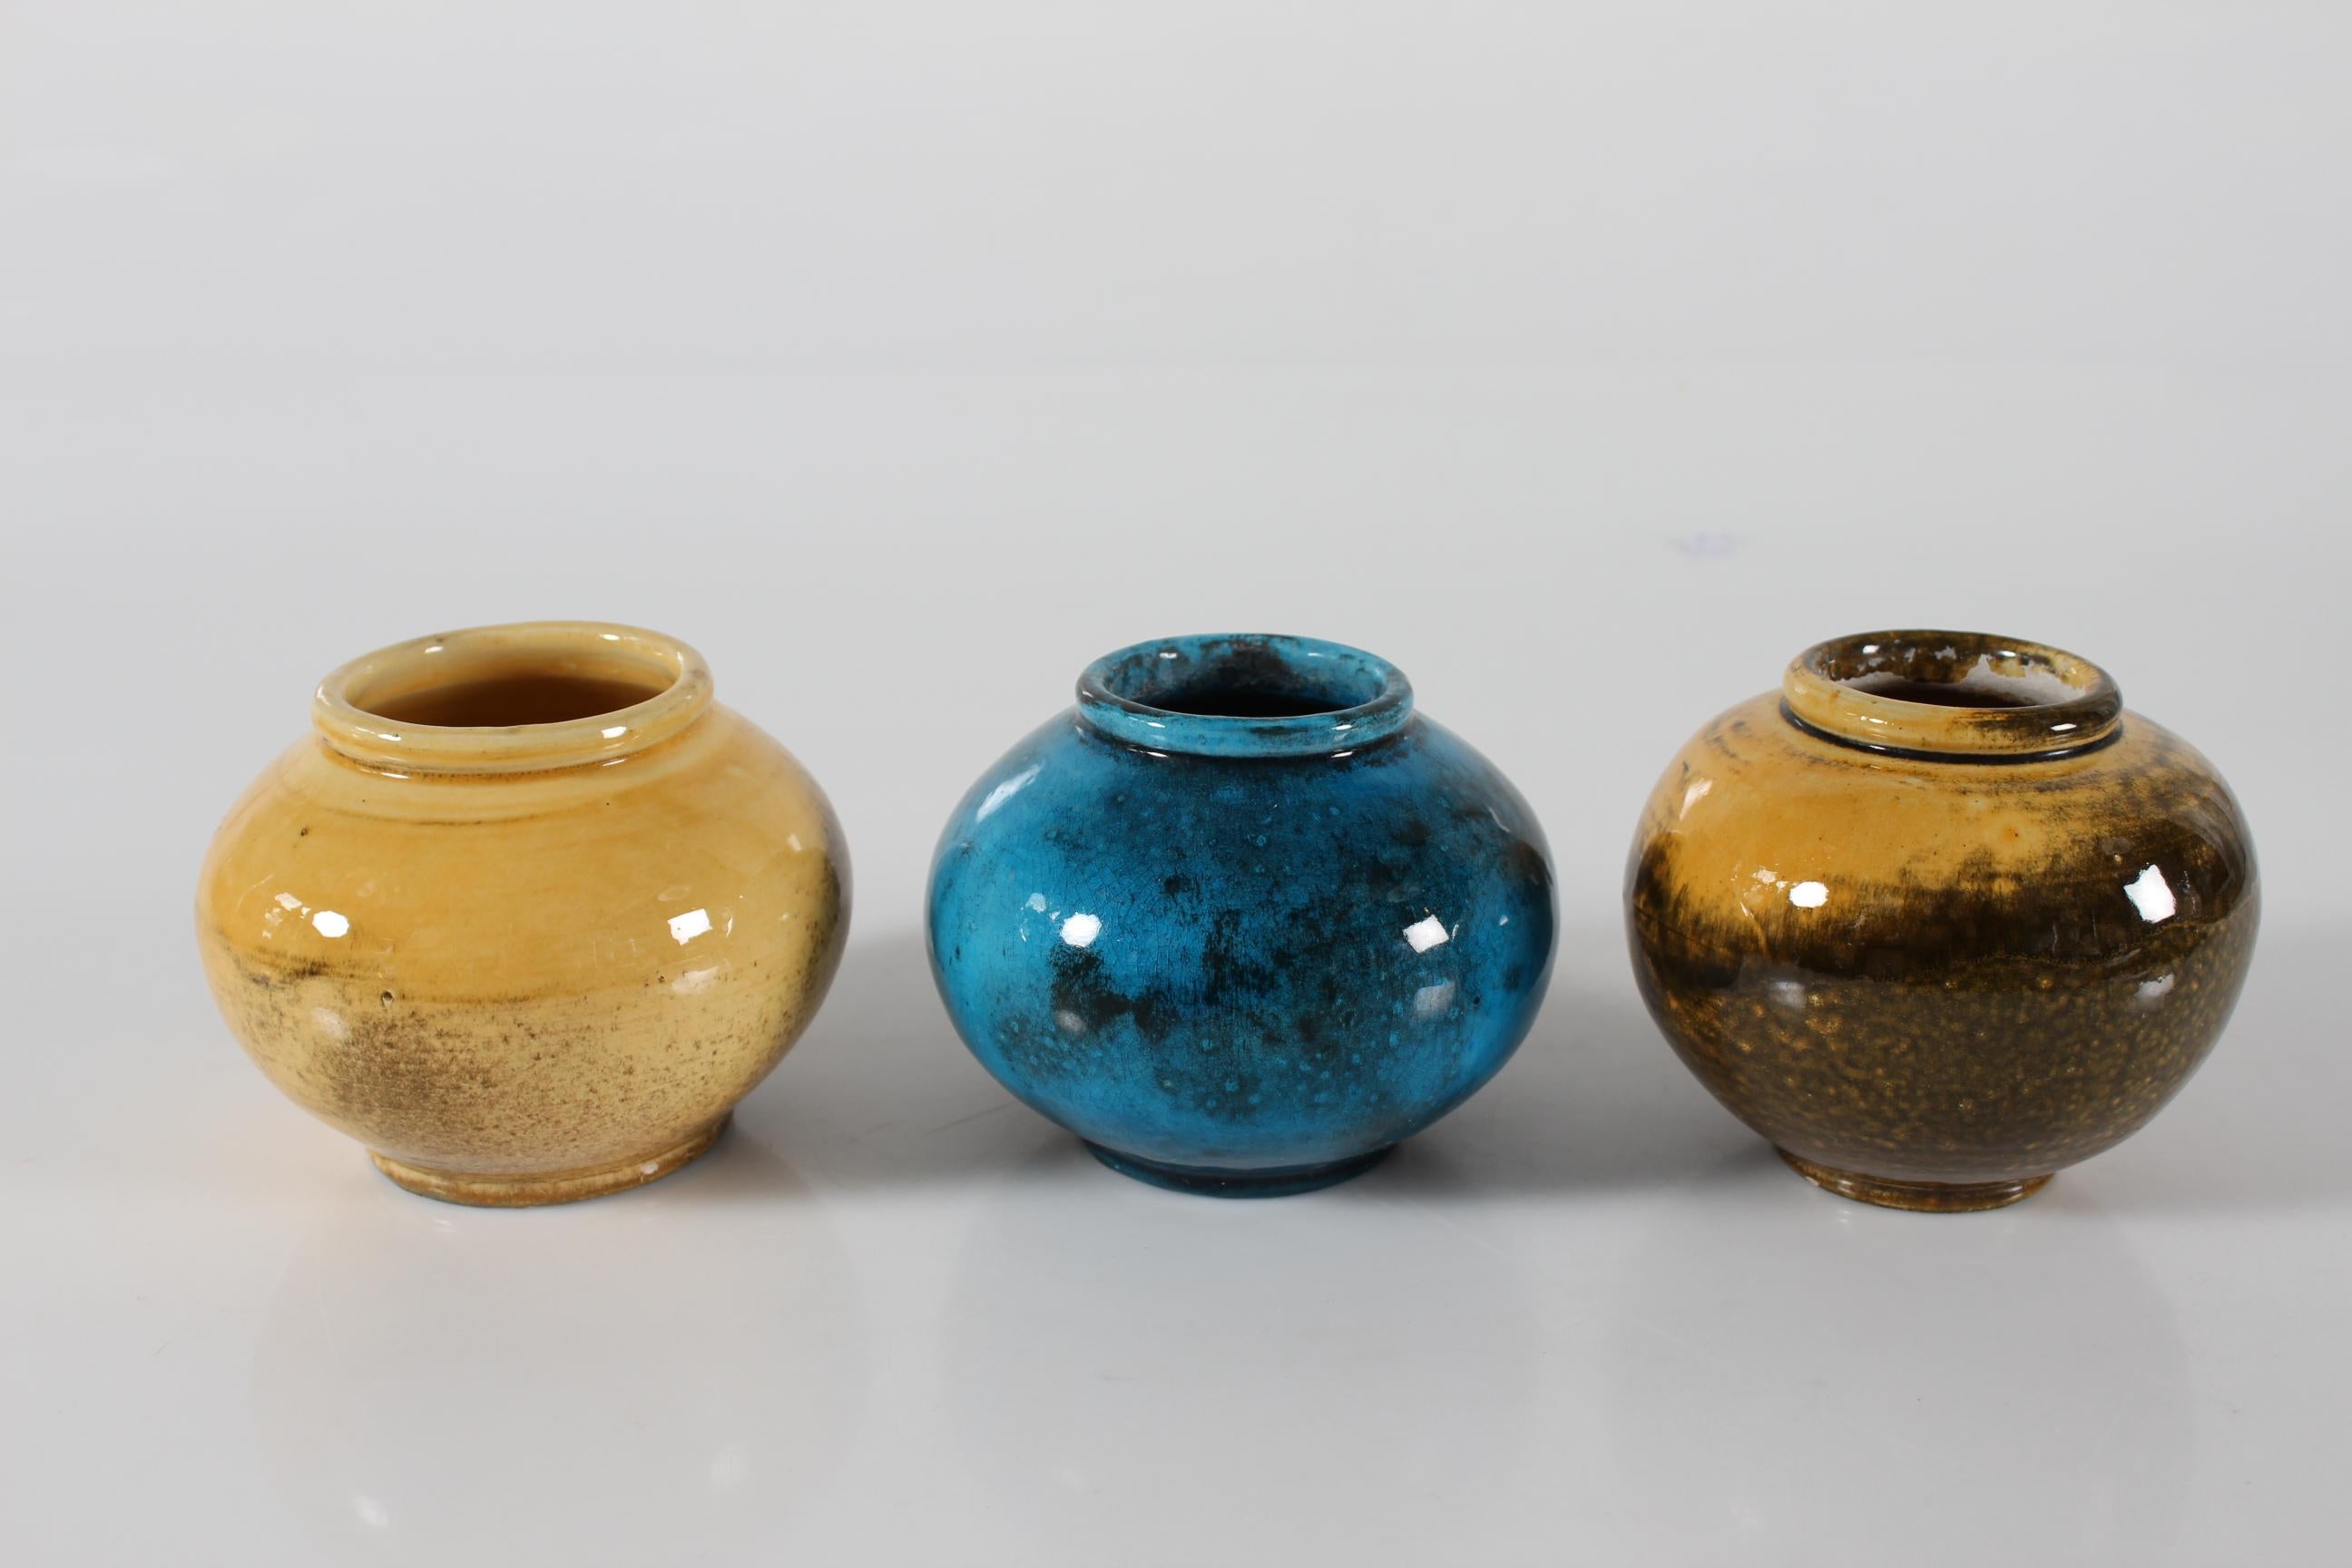 Set of 3 Art Deco spherical ceramic vases made by Herman A. Kähler in the 1930s.
The HAK vases are almost identical and decoratd with uranium glaze.
This glossy turquoise and ocher glaze with darker parts is developed by Nils Kähler and especially